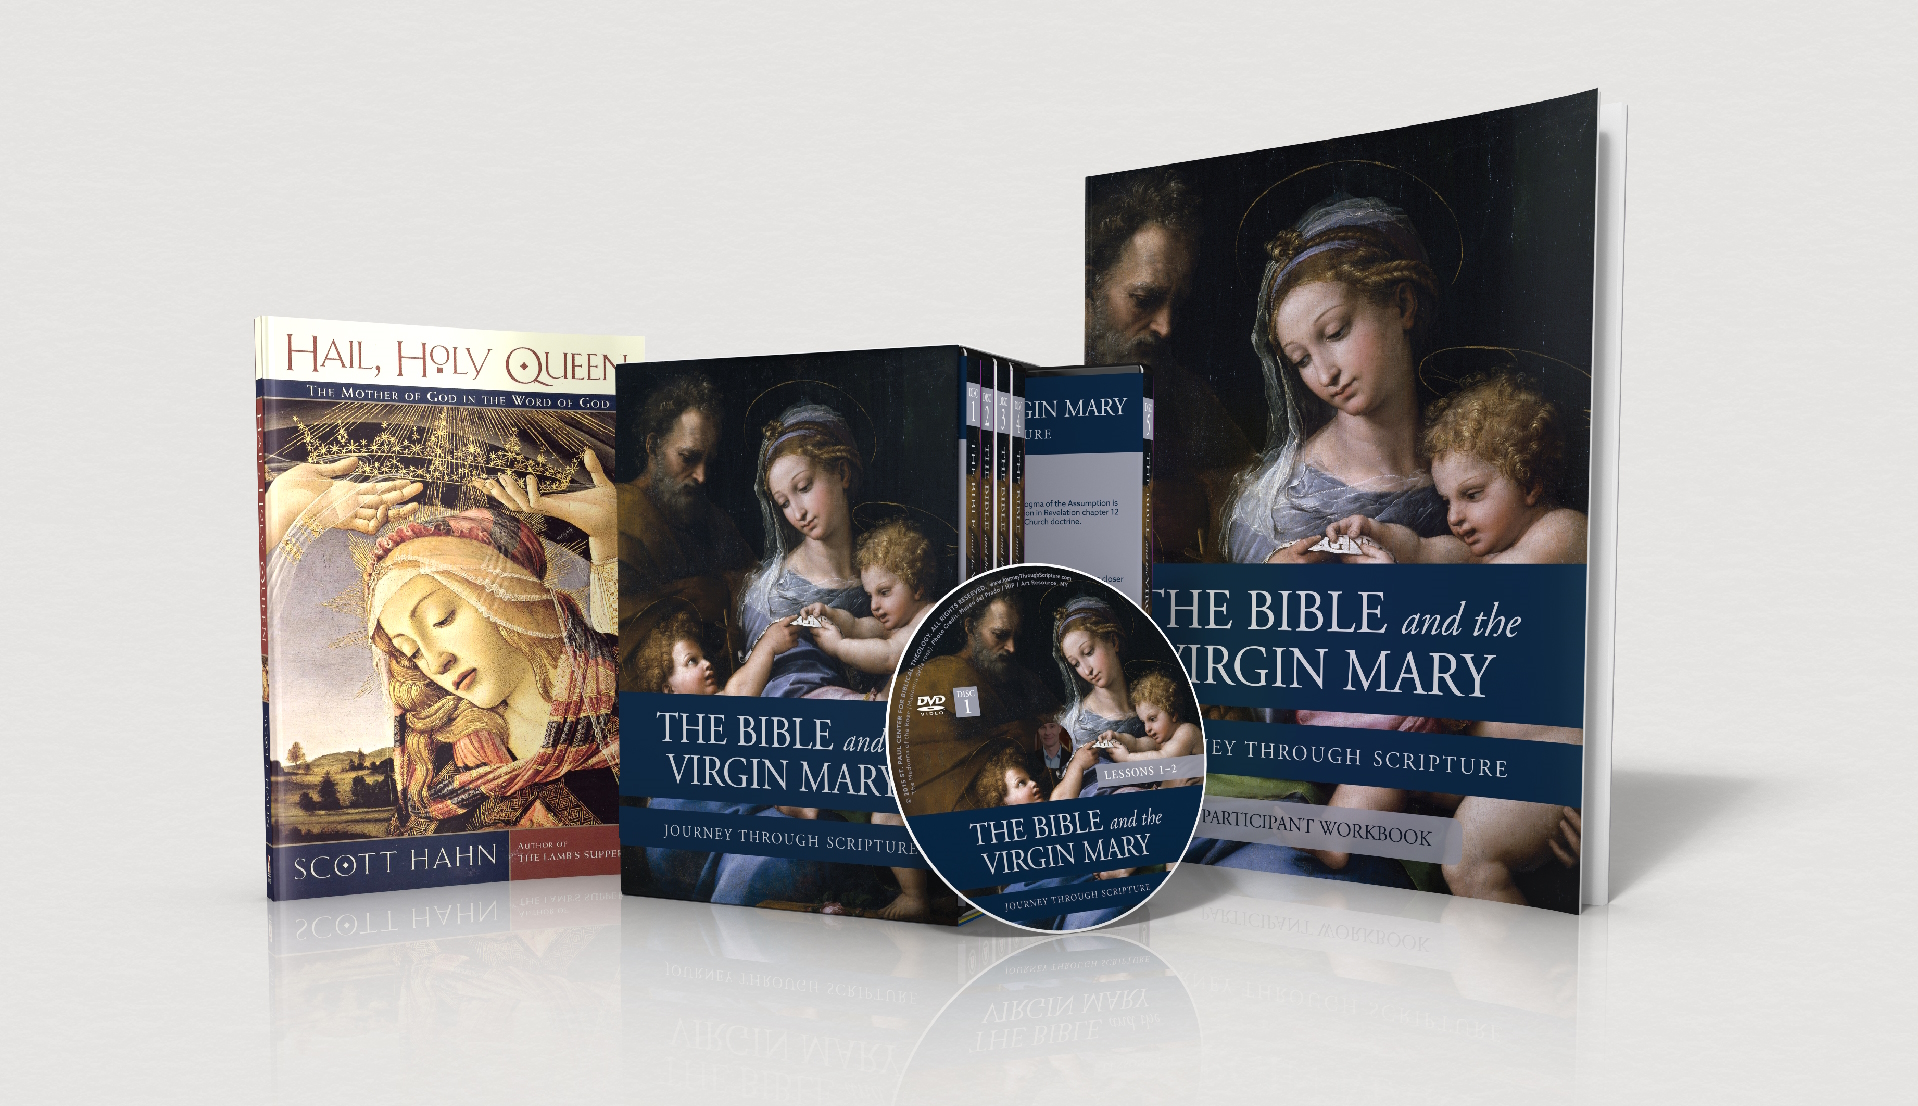 The Bible and the Virgin Mary Books and DVDs